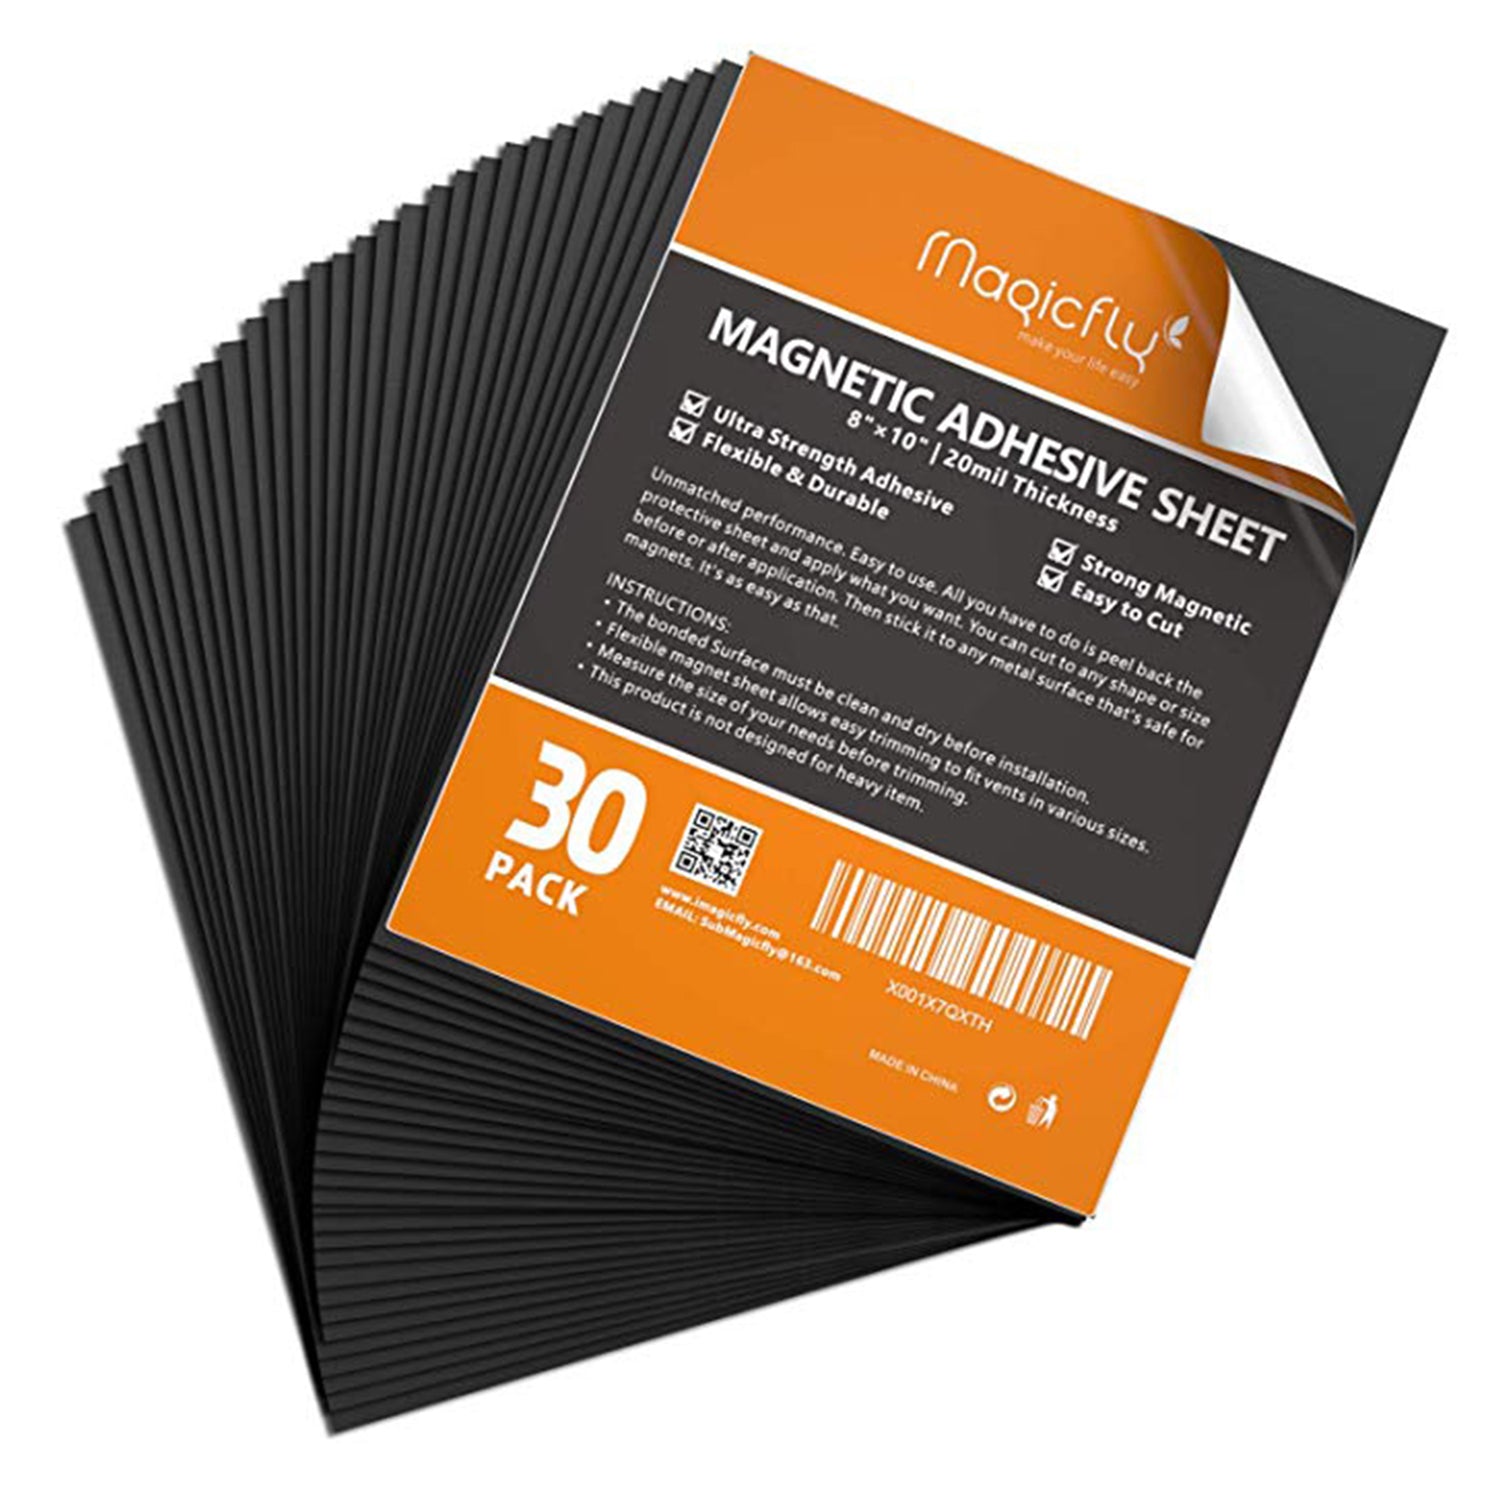 Magicfly Flexible Magnet Sheets with Adhesive 8 X 10 Inch, Pack of 15